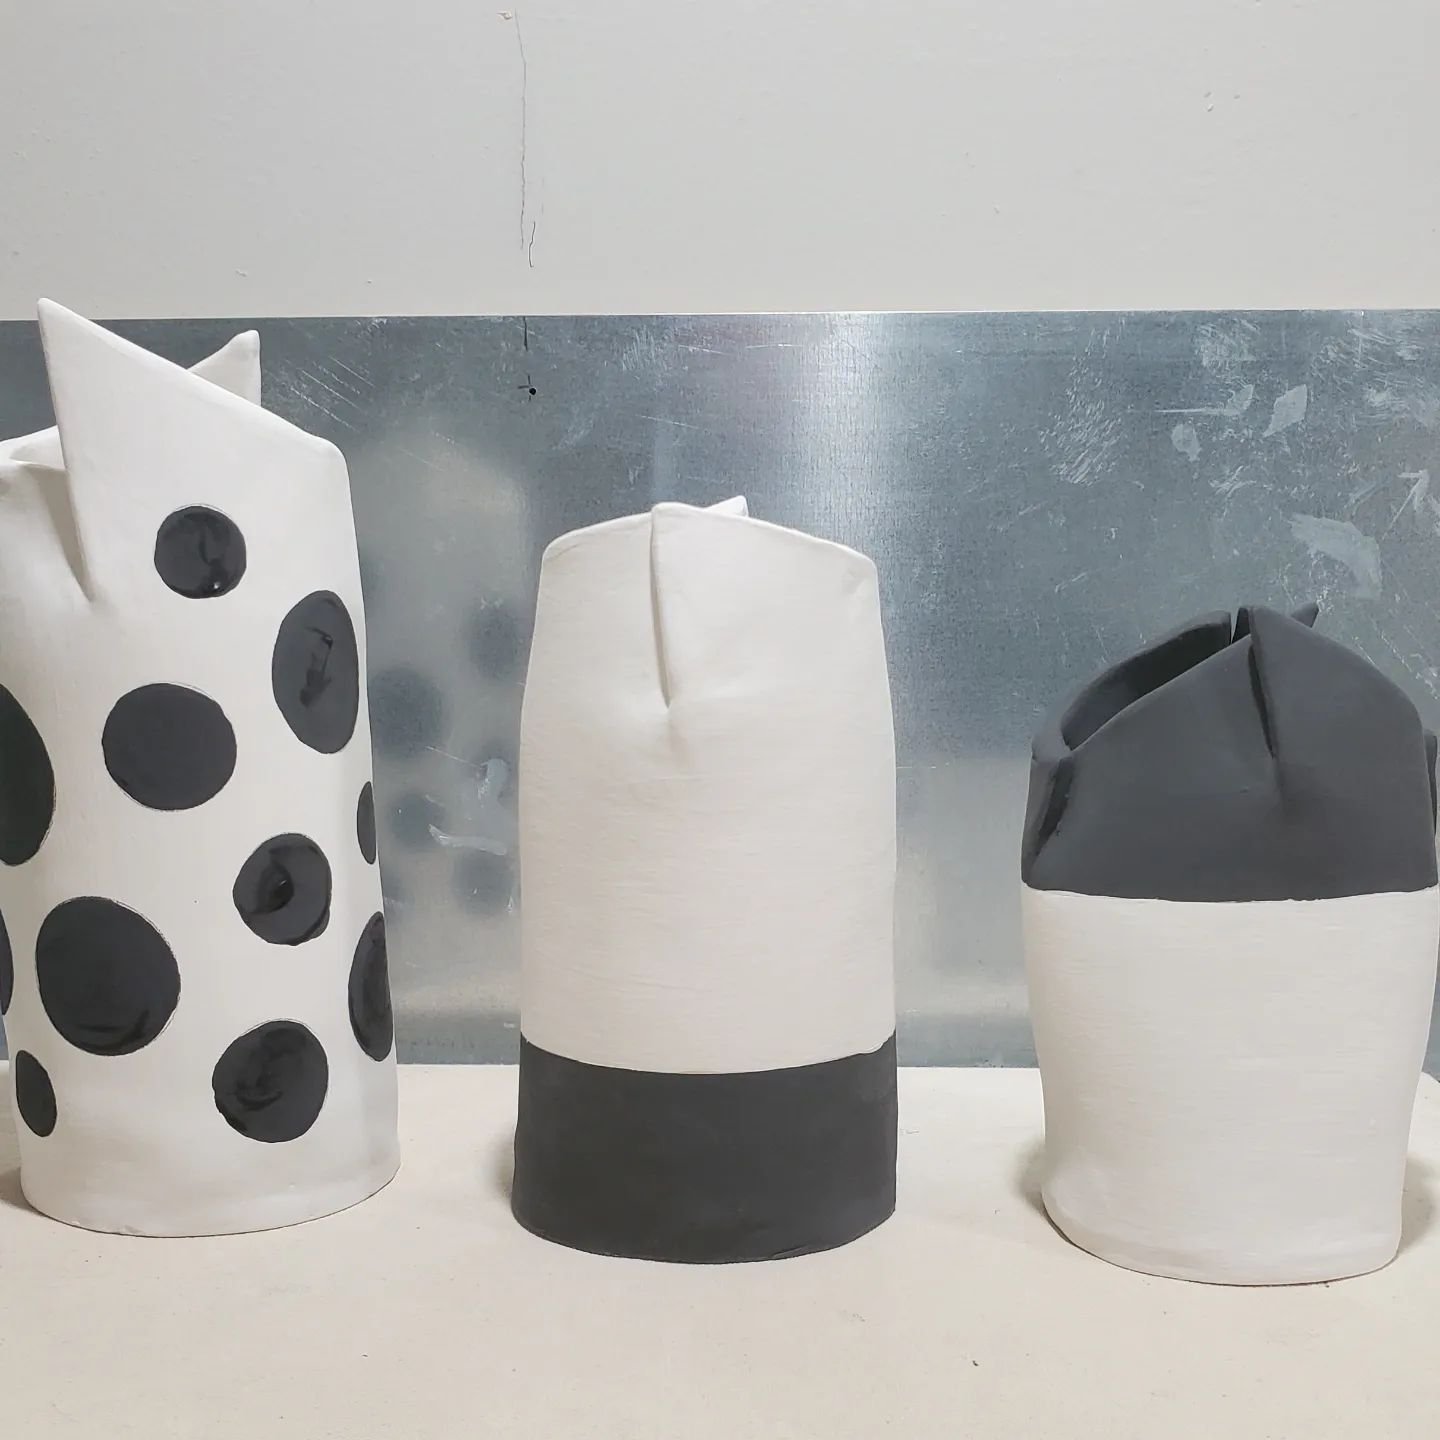 The black and white vases are ready for the kiln later today.  All for the black and white wedding.  Big hugs Birov and Adame.